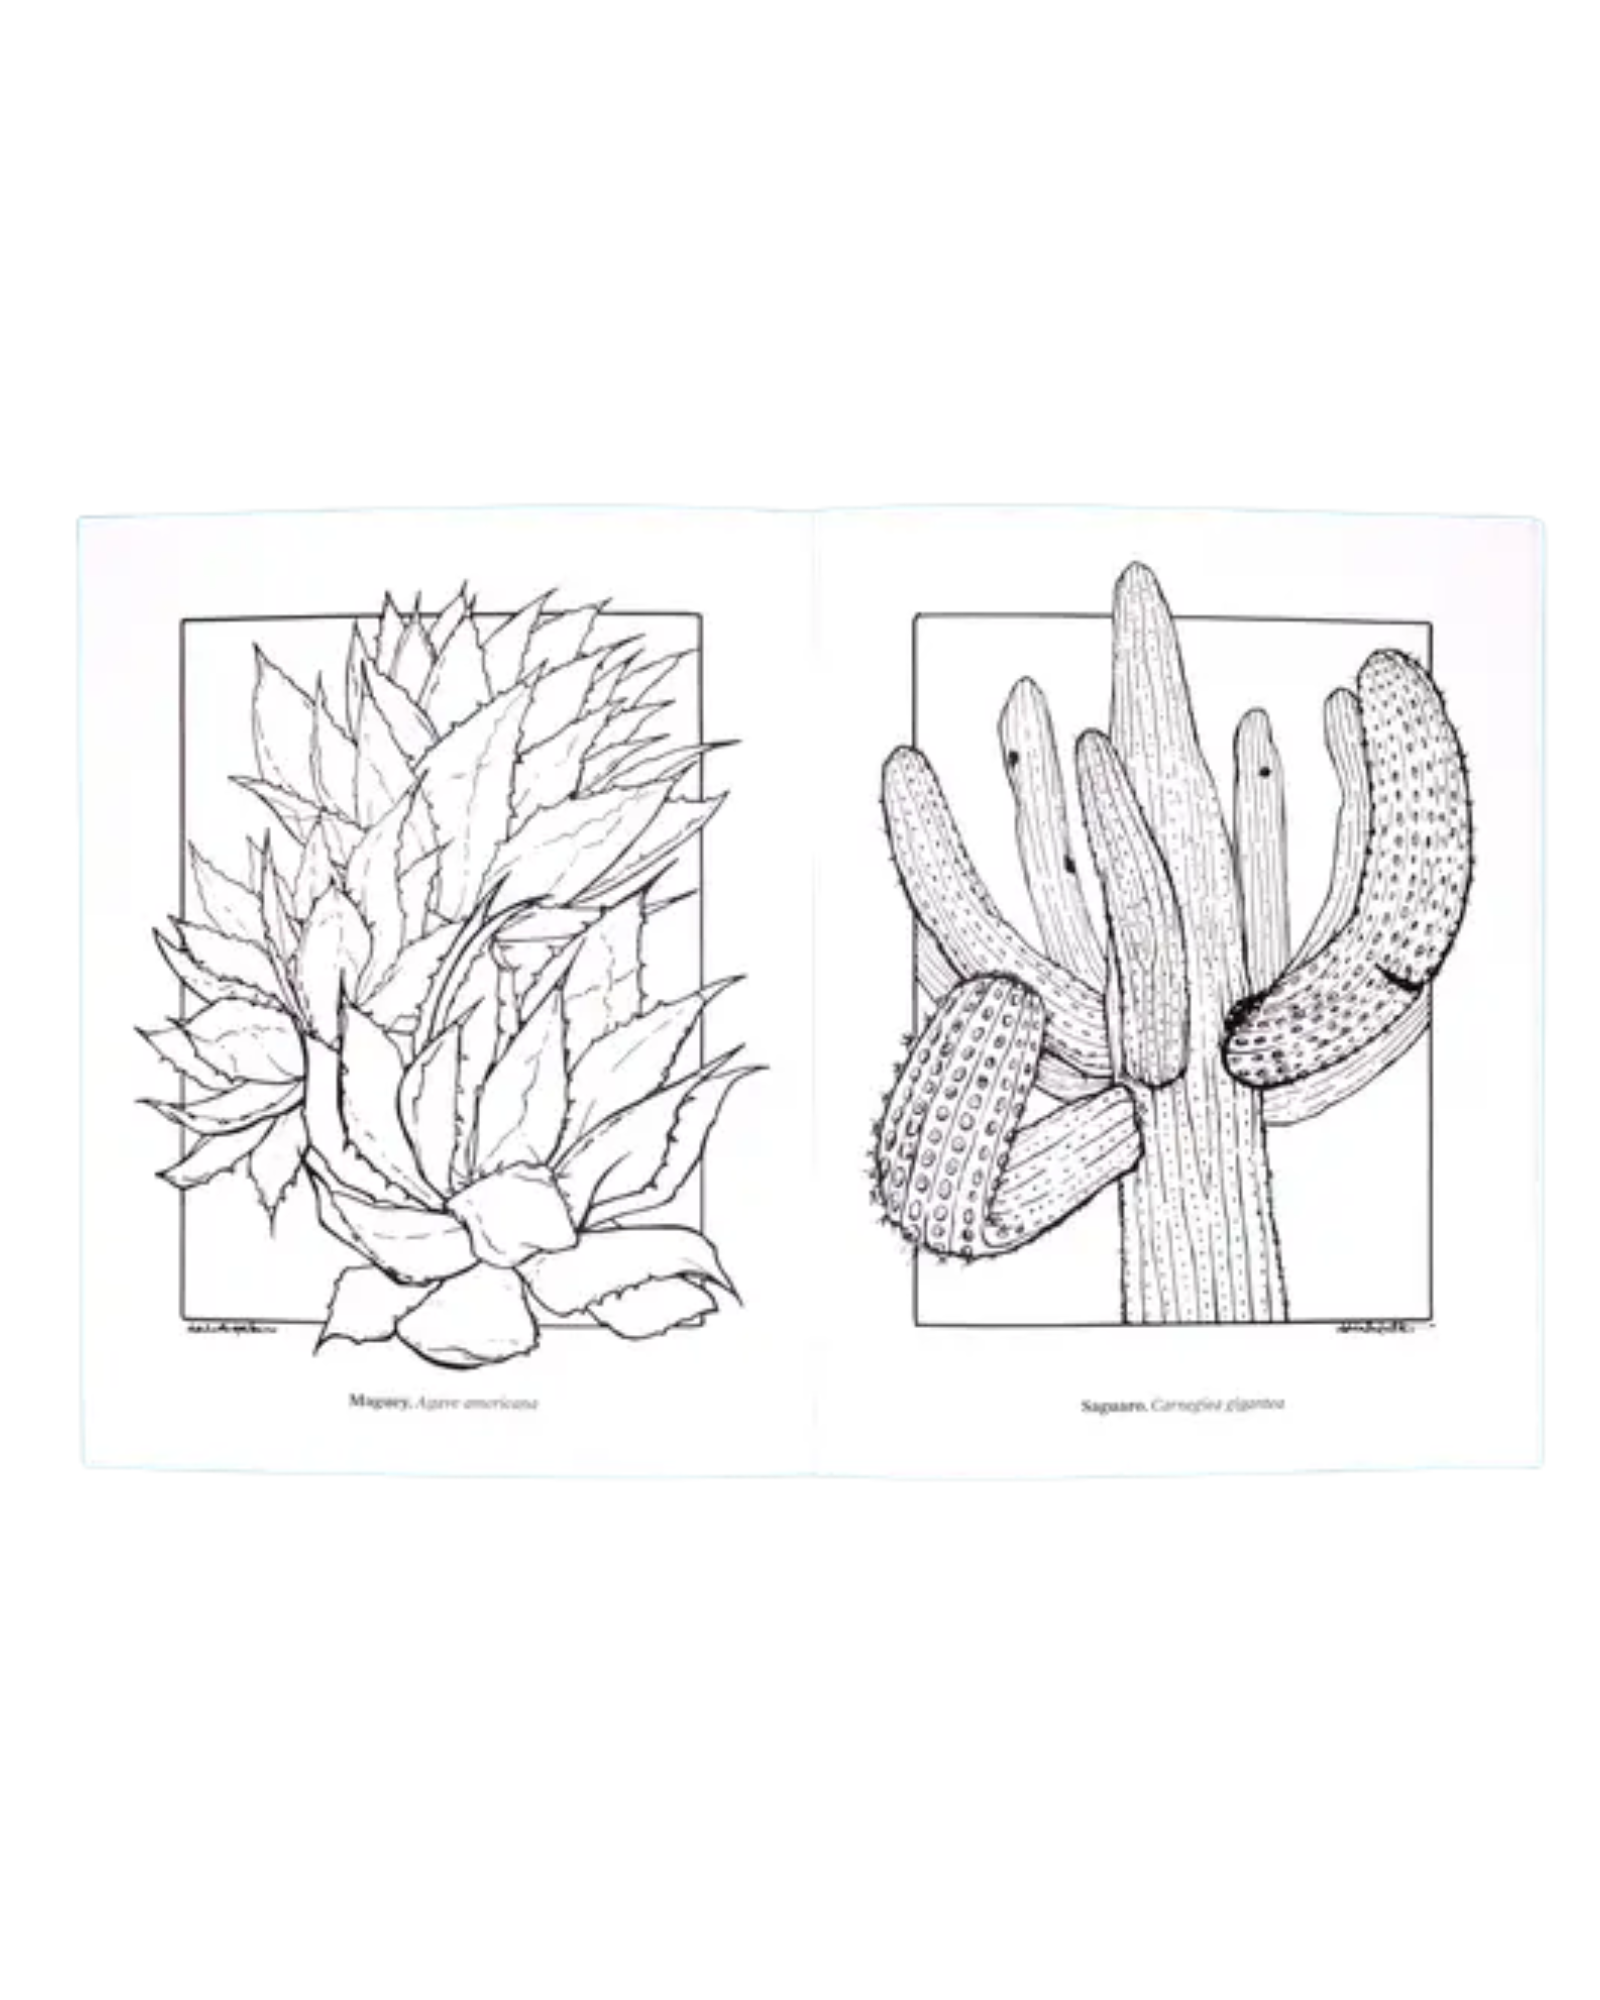 Interior coloring page example of agave plant and saguaro cactus